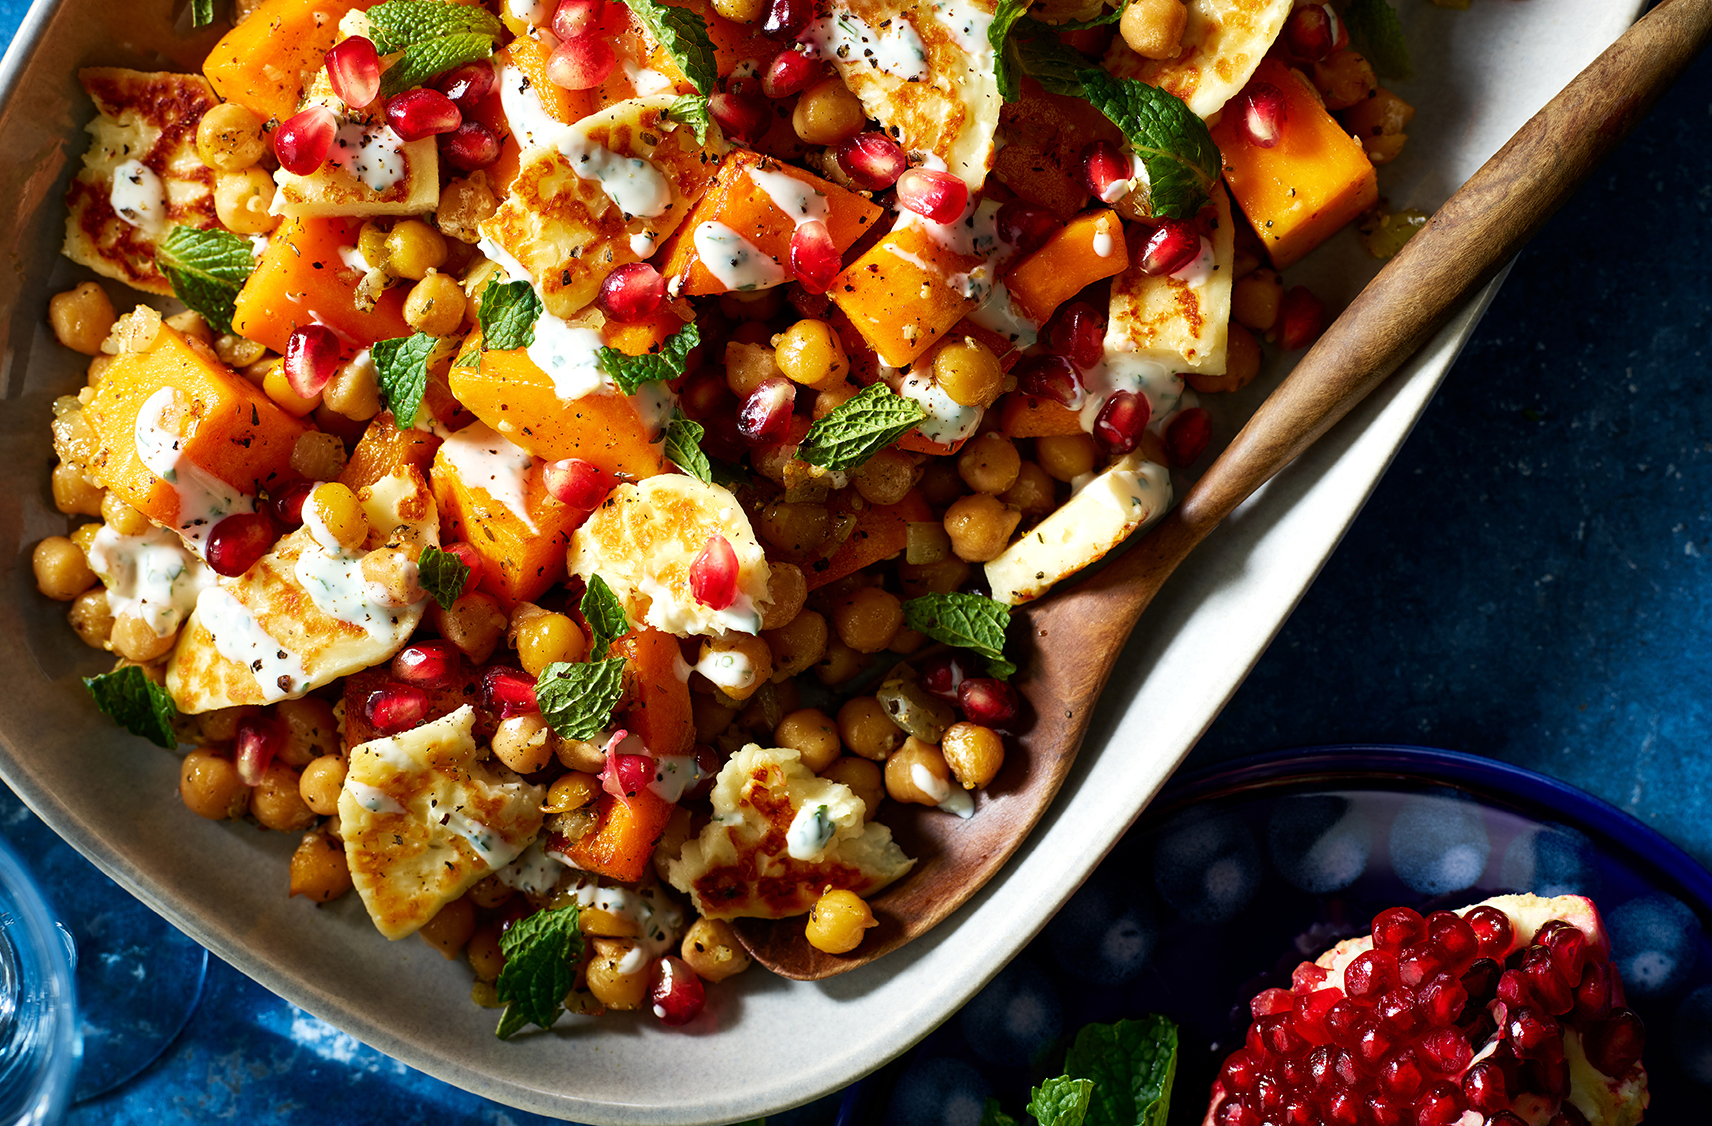 Pomegranate sits beside a dish of diced squash, chickpeas, mint and halloom